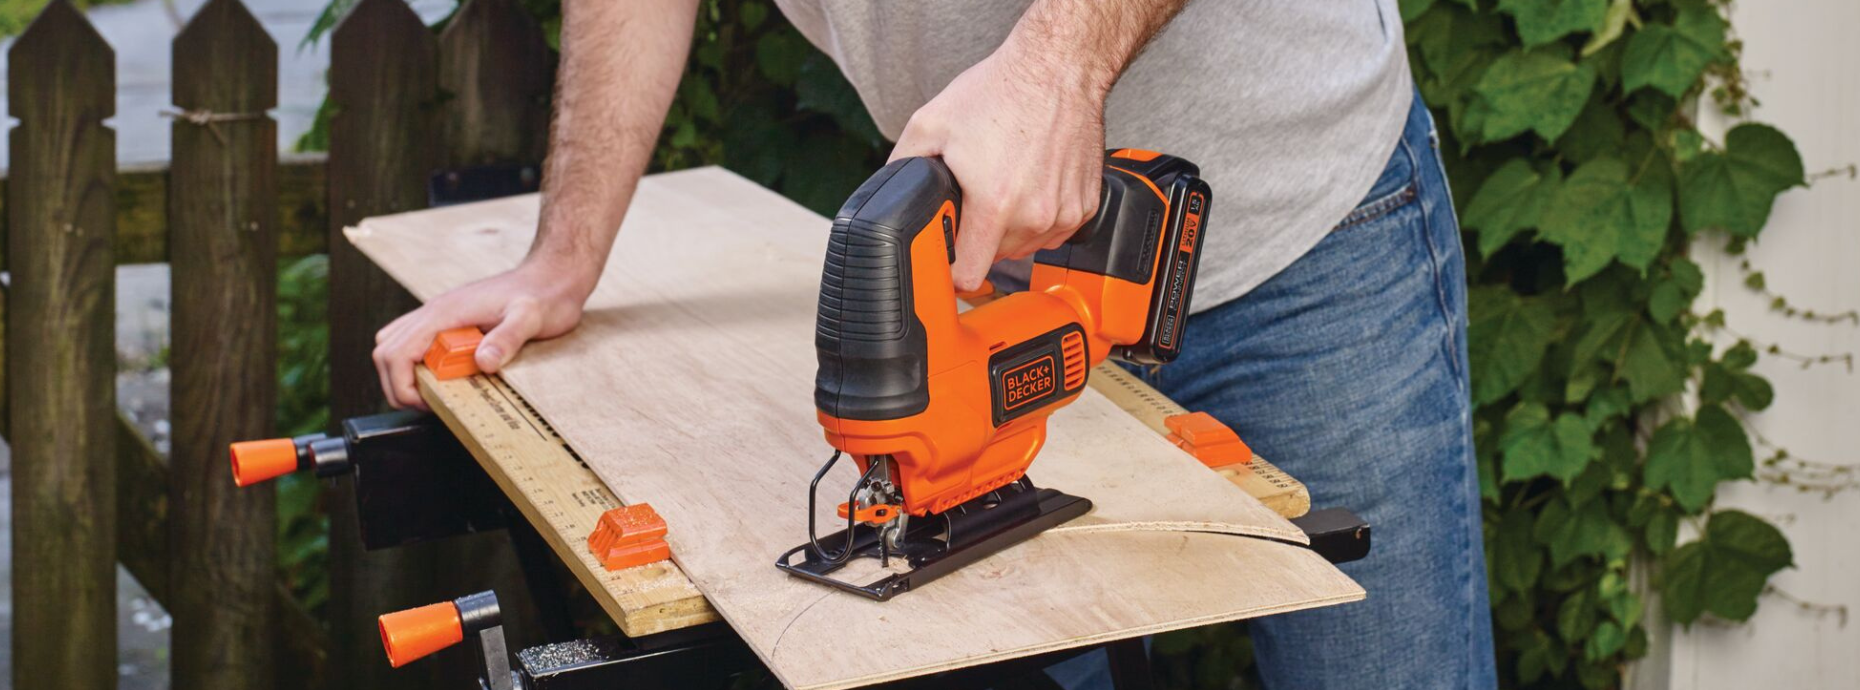 BLACK+DECKER 7 Amp Electric Reciprocating Saw with Removable Branch Holder  (BES301K)